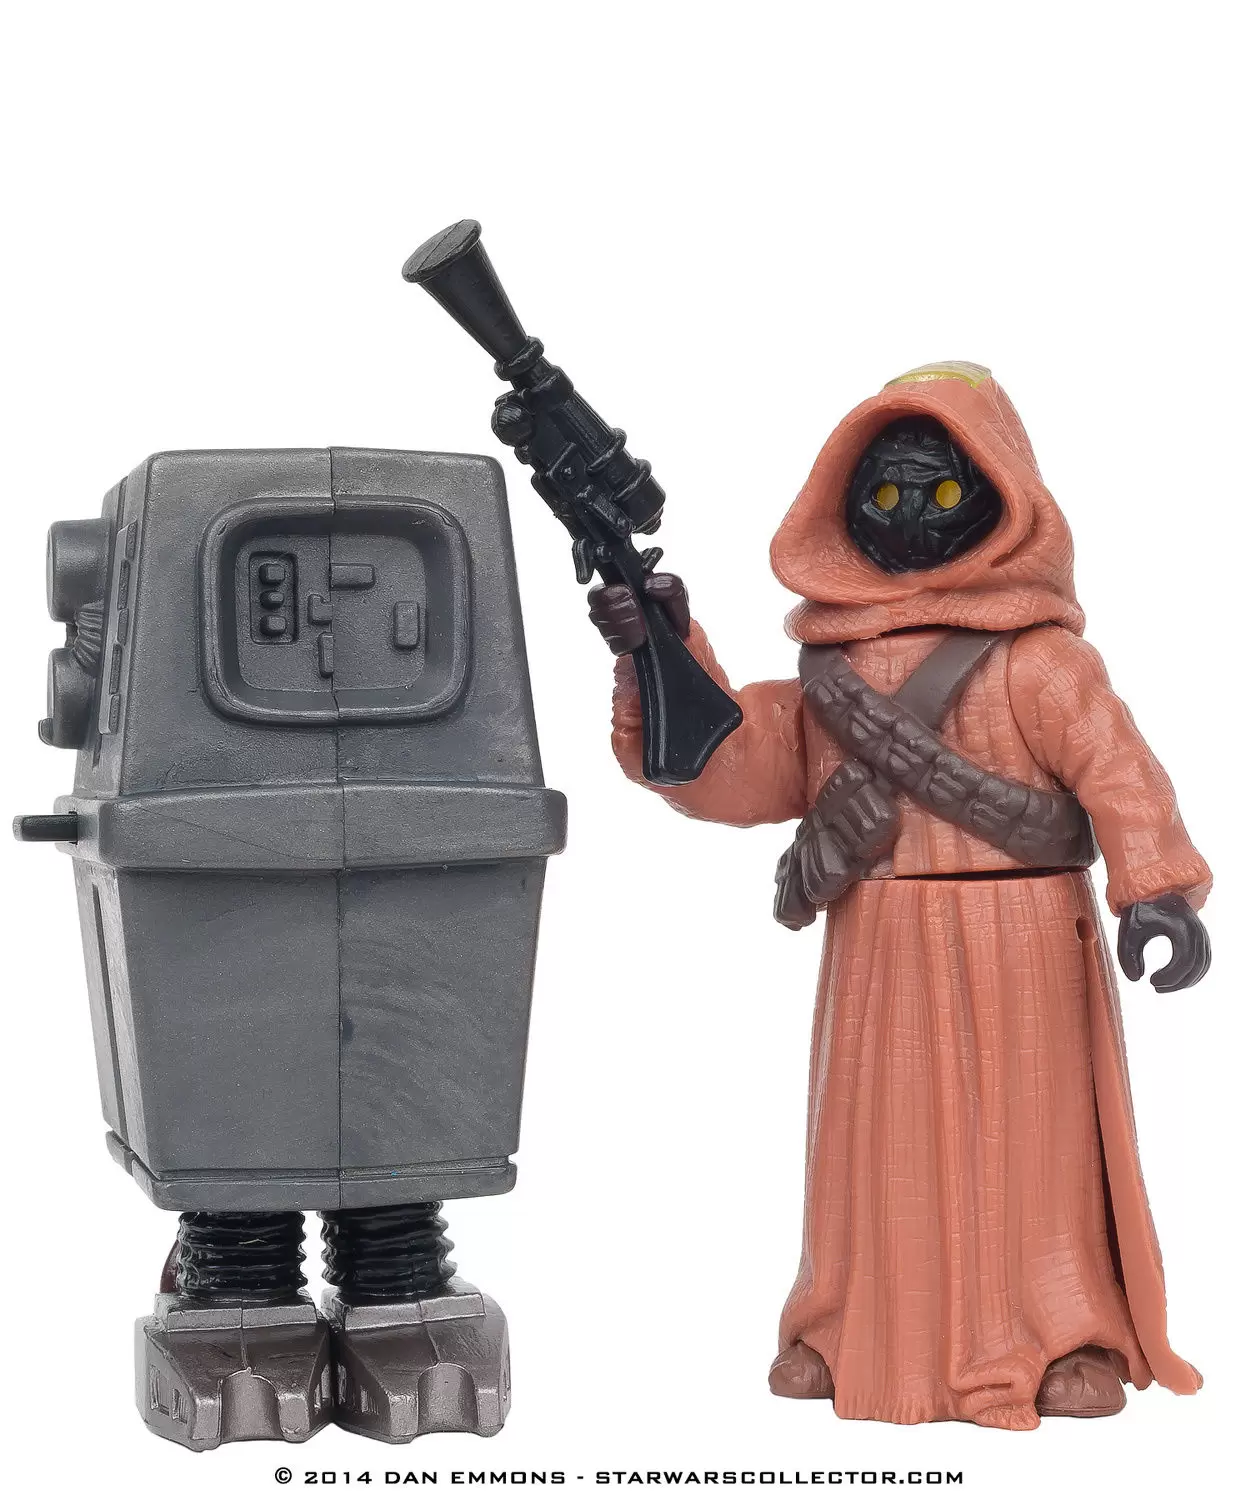 Hasbro Star Wars Potf2 CommTech Jawa and Gonk Droid 2 Peg Holes 1999 for sale online 